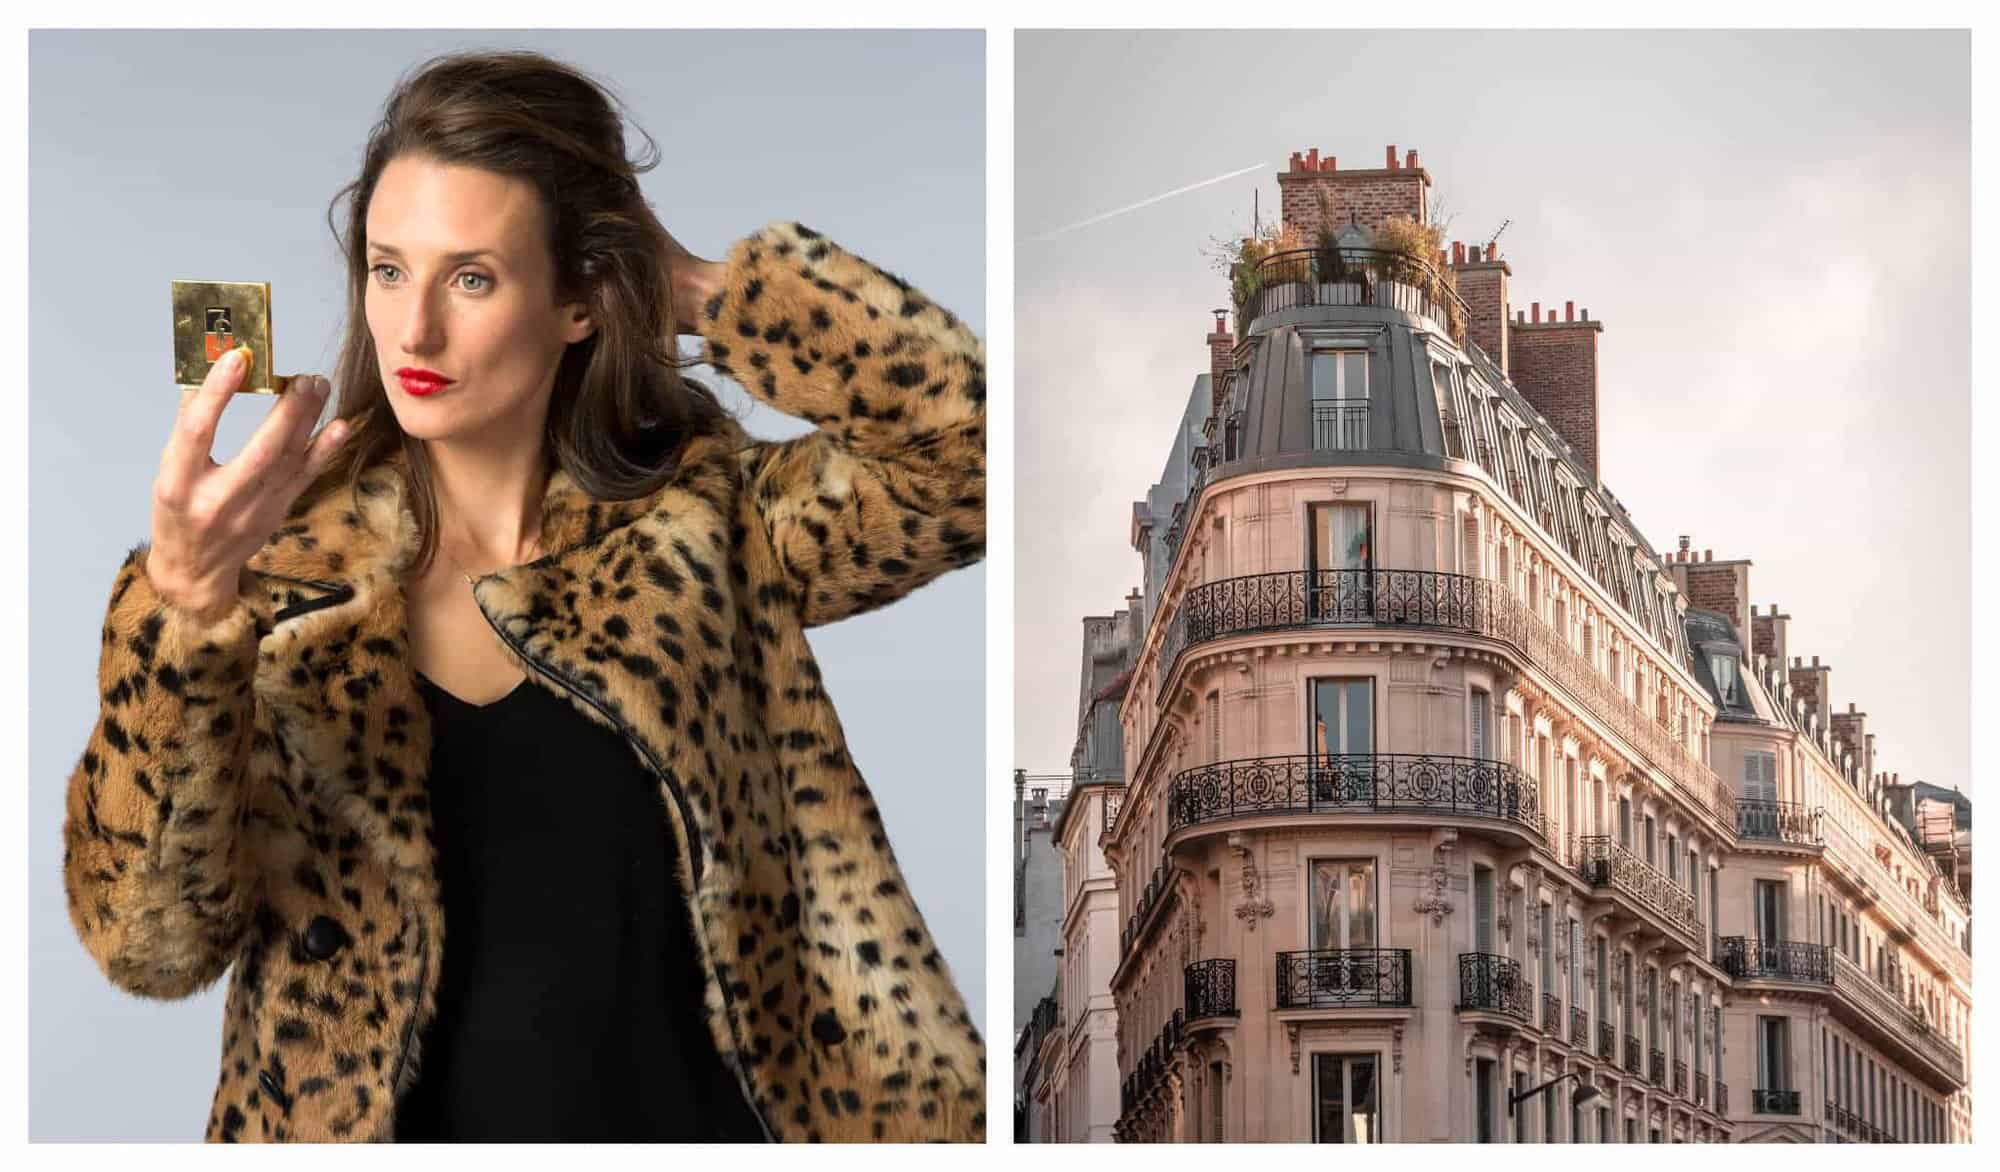 Left: The French actress Camille Cottin stars in a show called Connasse, dressed up as a demanding Parisian in leopard coat and red lipstick; Right: The sunsets gives this Parisian Haussmannian building a glow in its zinc rooftop.